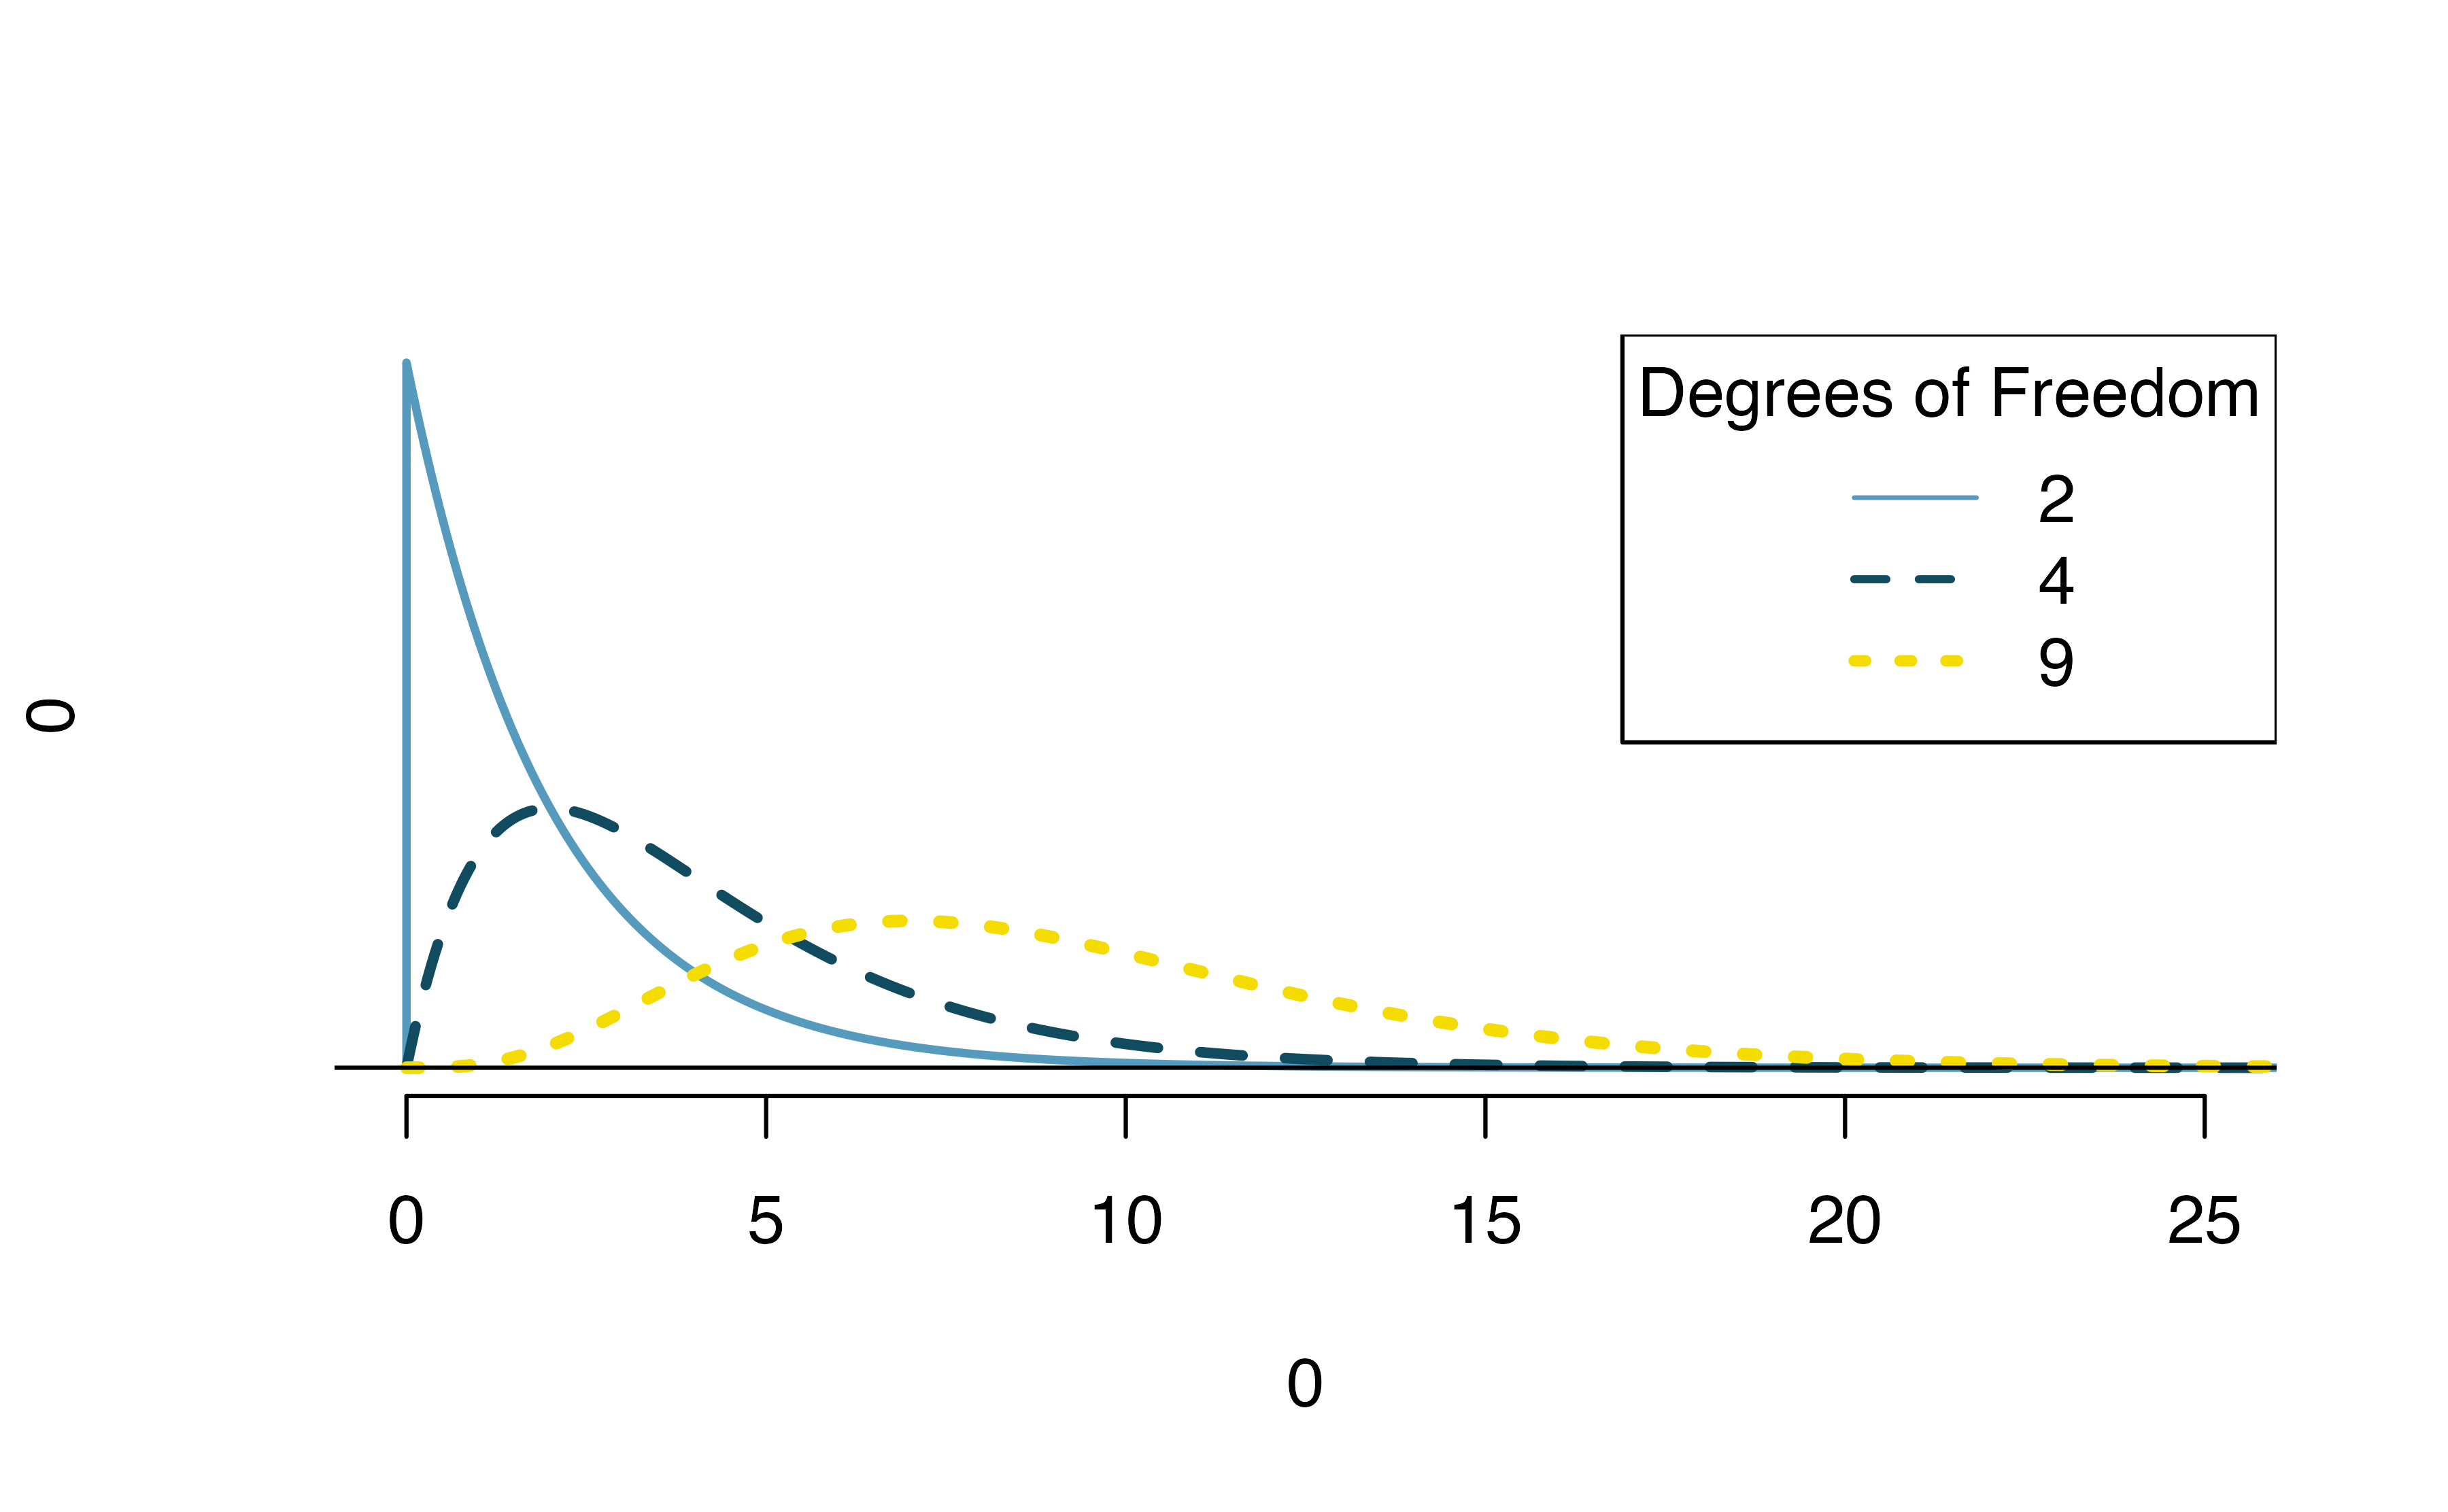 The chi-squared distribution for differing degrees of freedom. The larger the degrees of freedom, the longer the right tail extends. The smaller the degrees of freedom, the more peaked the mode on the left becomes.